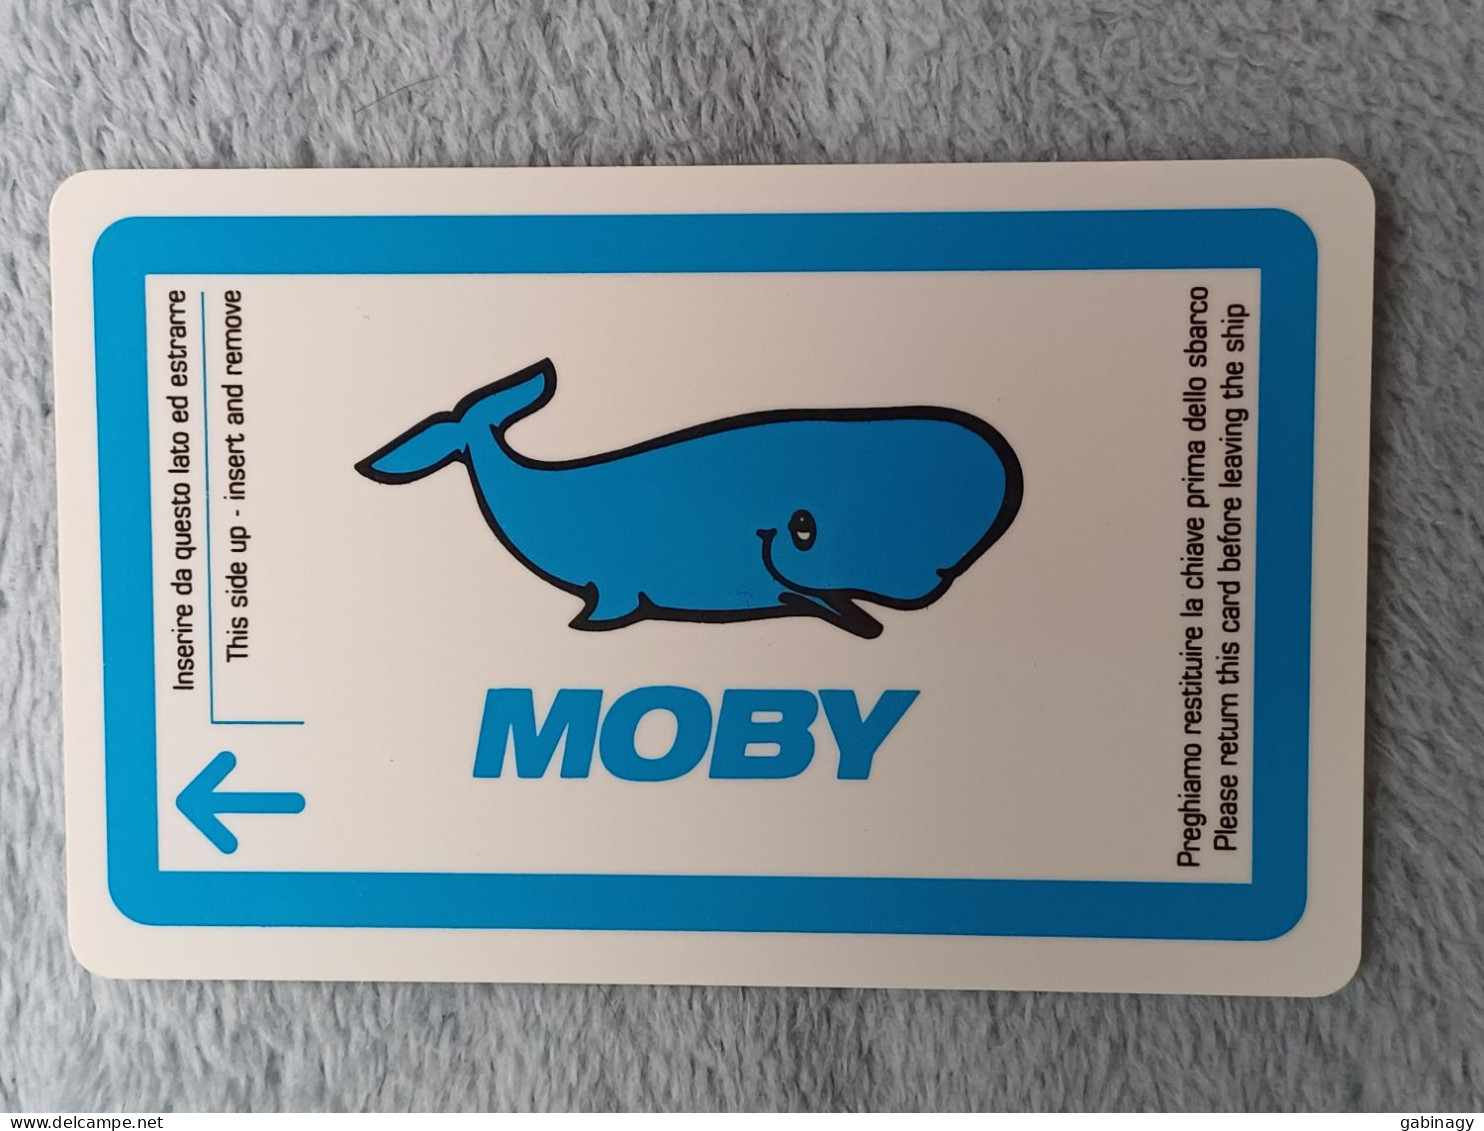 HOTEL KEYS - 2589 - ITALY - MOBY - WHALE - Cartes D'hotel